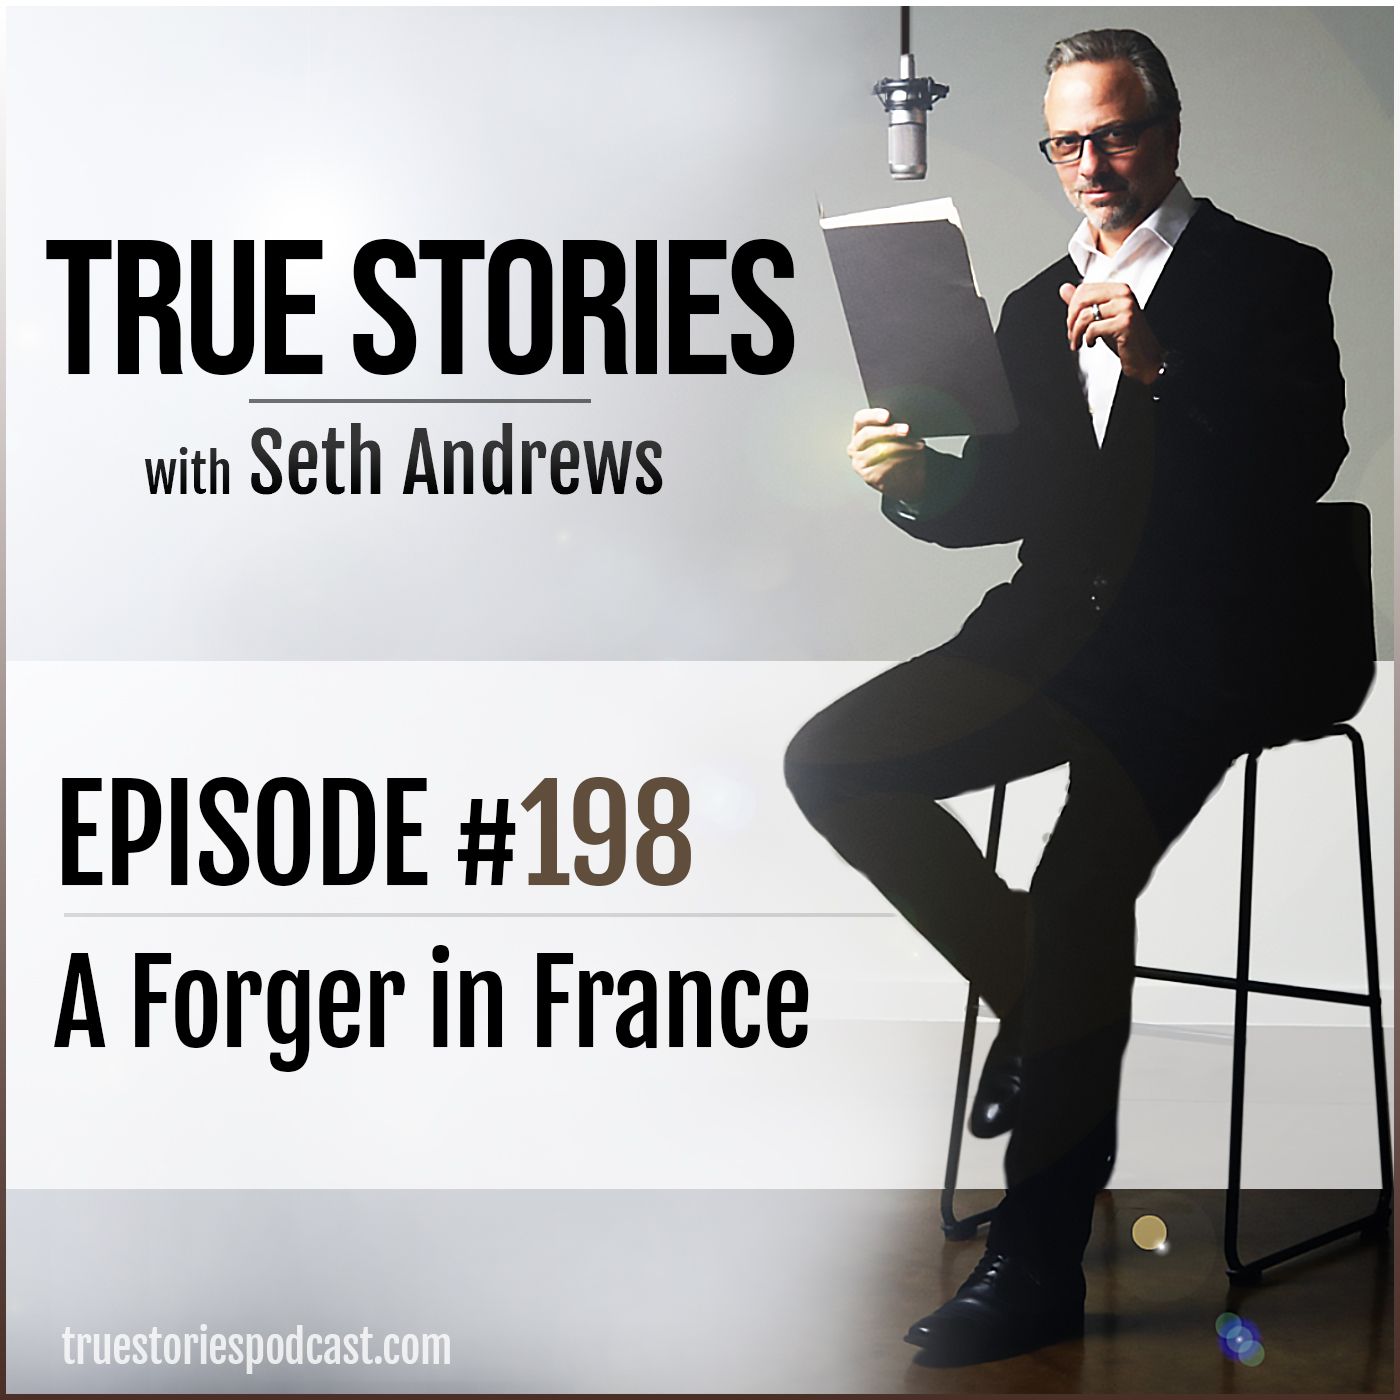 True Stories #198 - A Forger in France